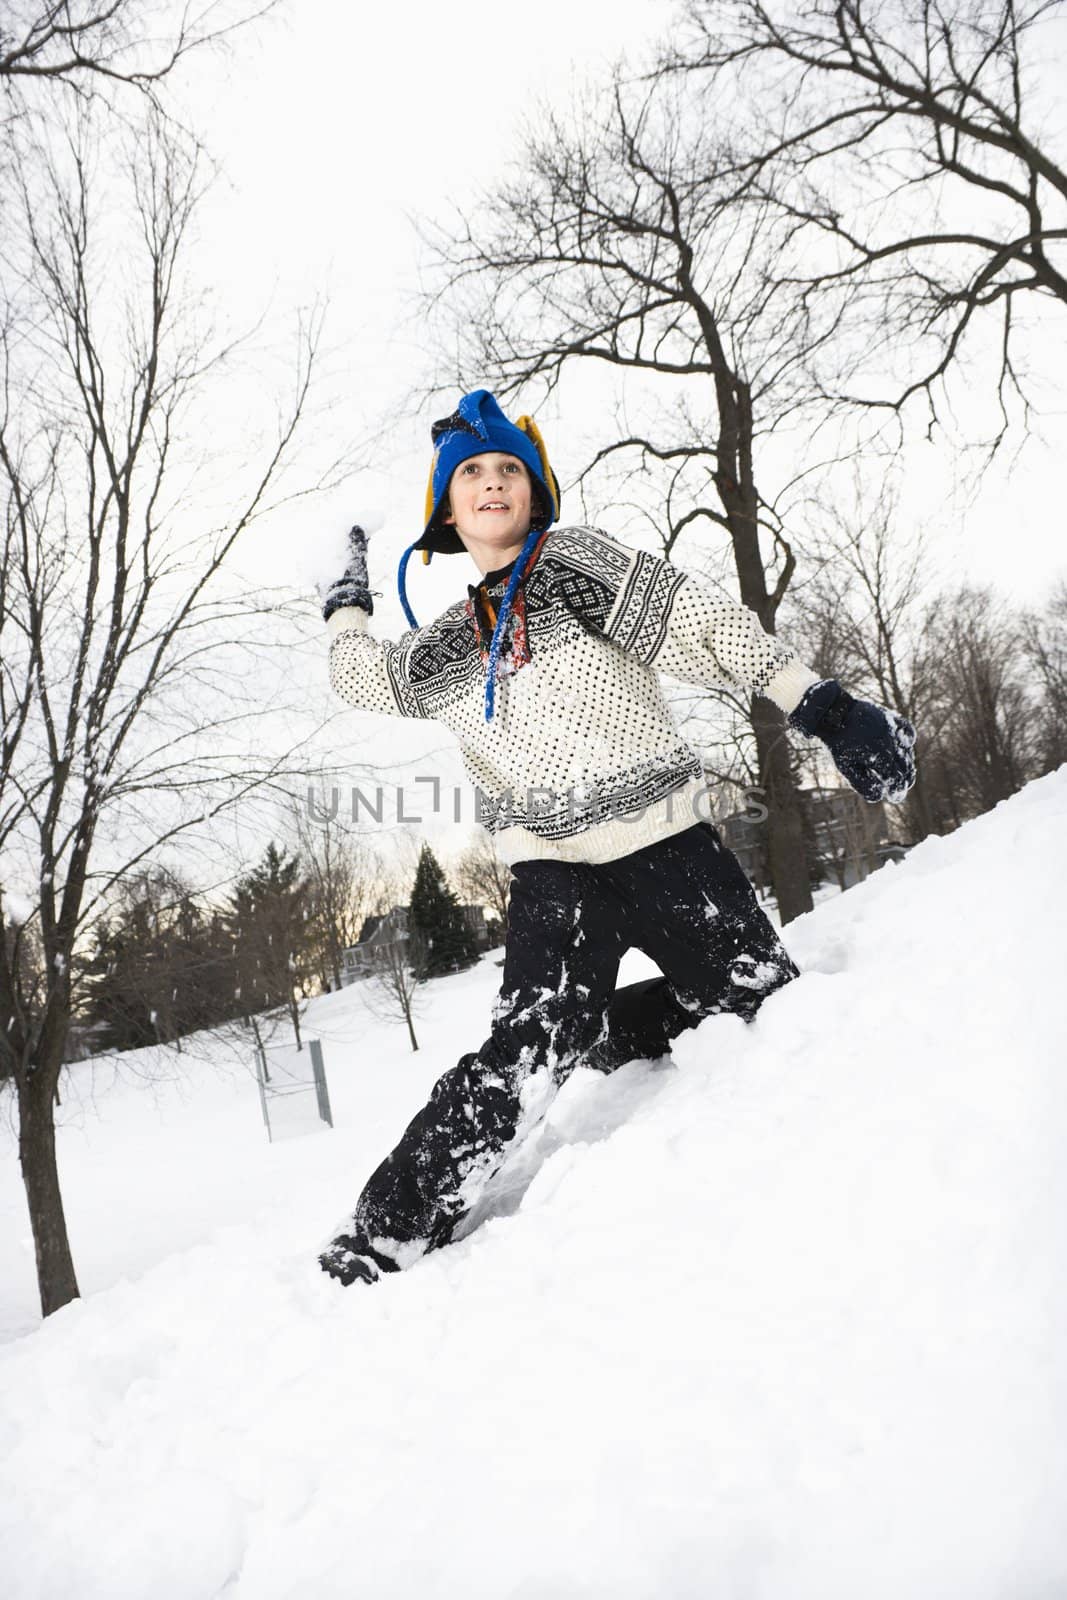 Caucasian boy wearing sweater and blue winter cap playing and throwing snow.